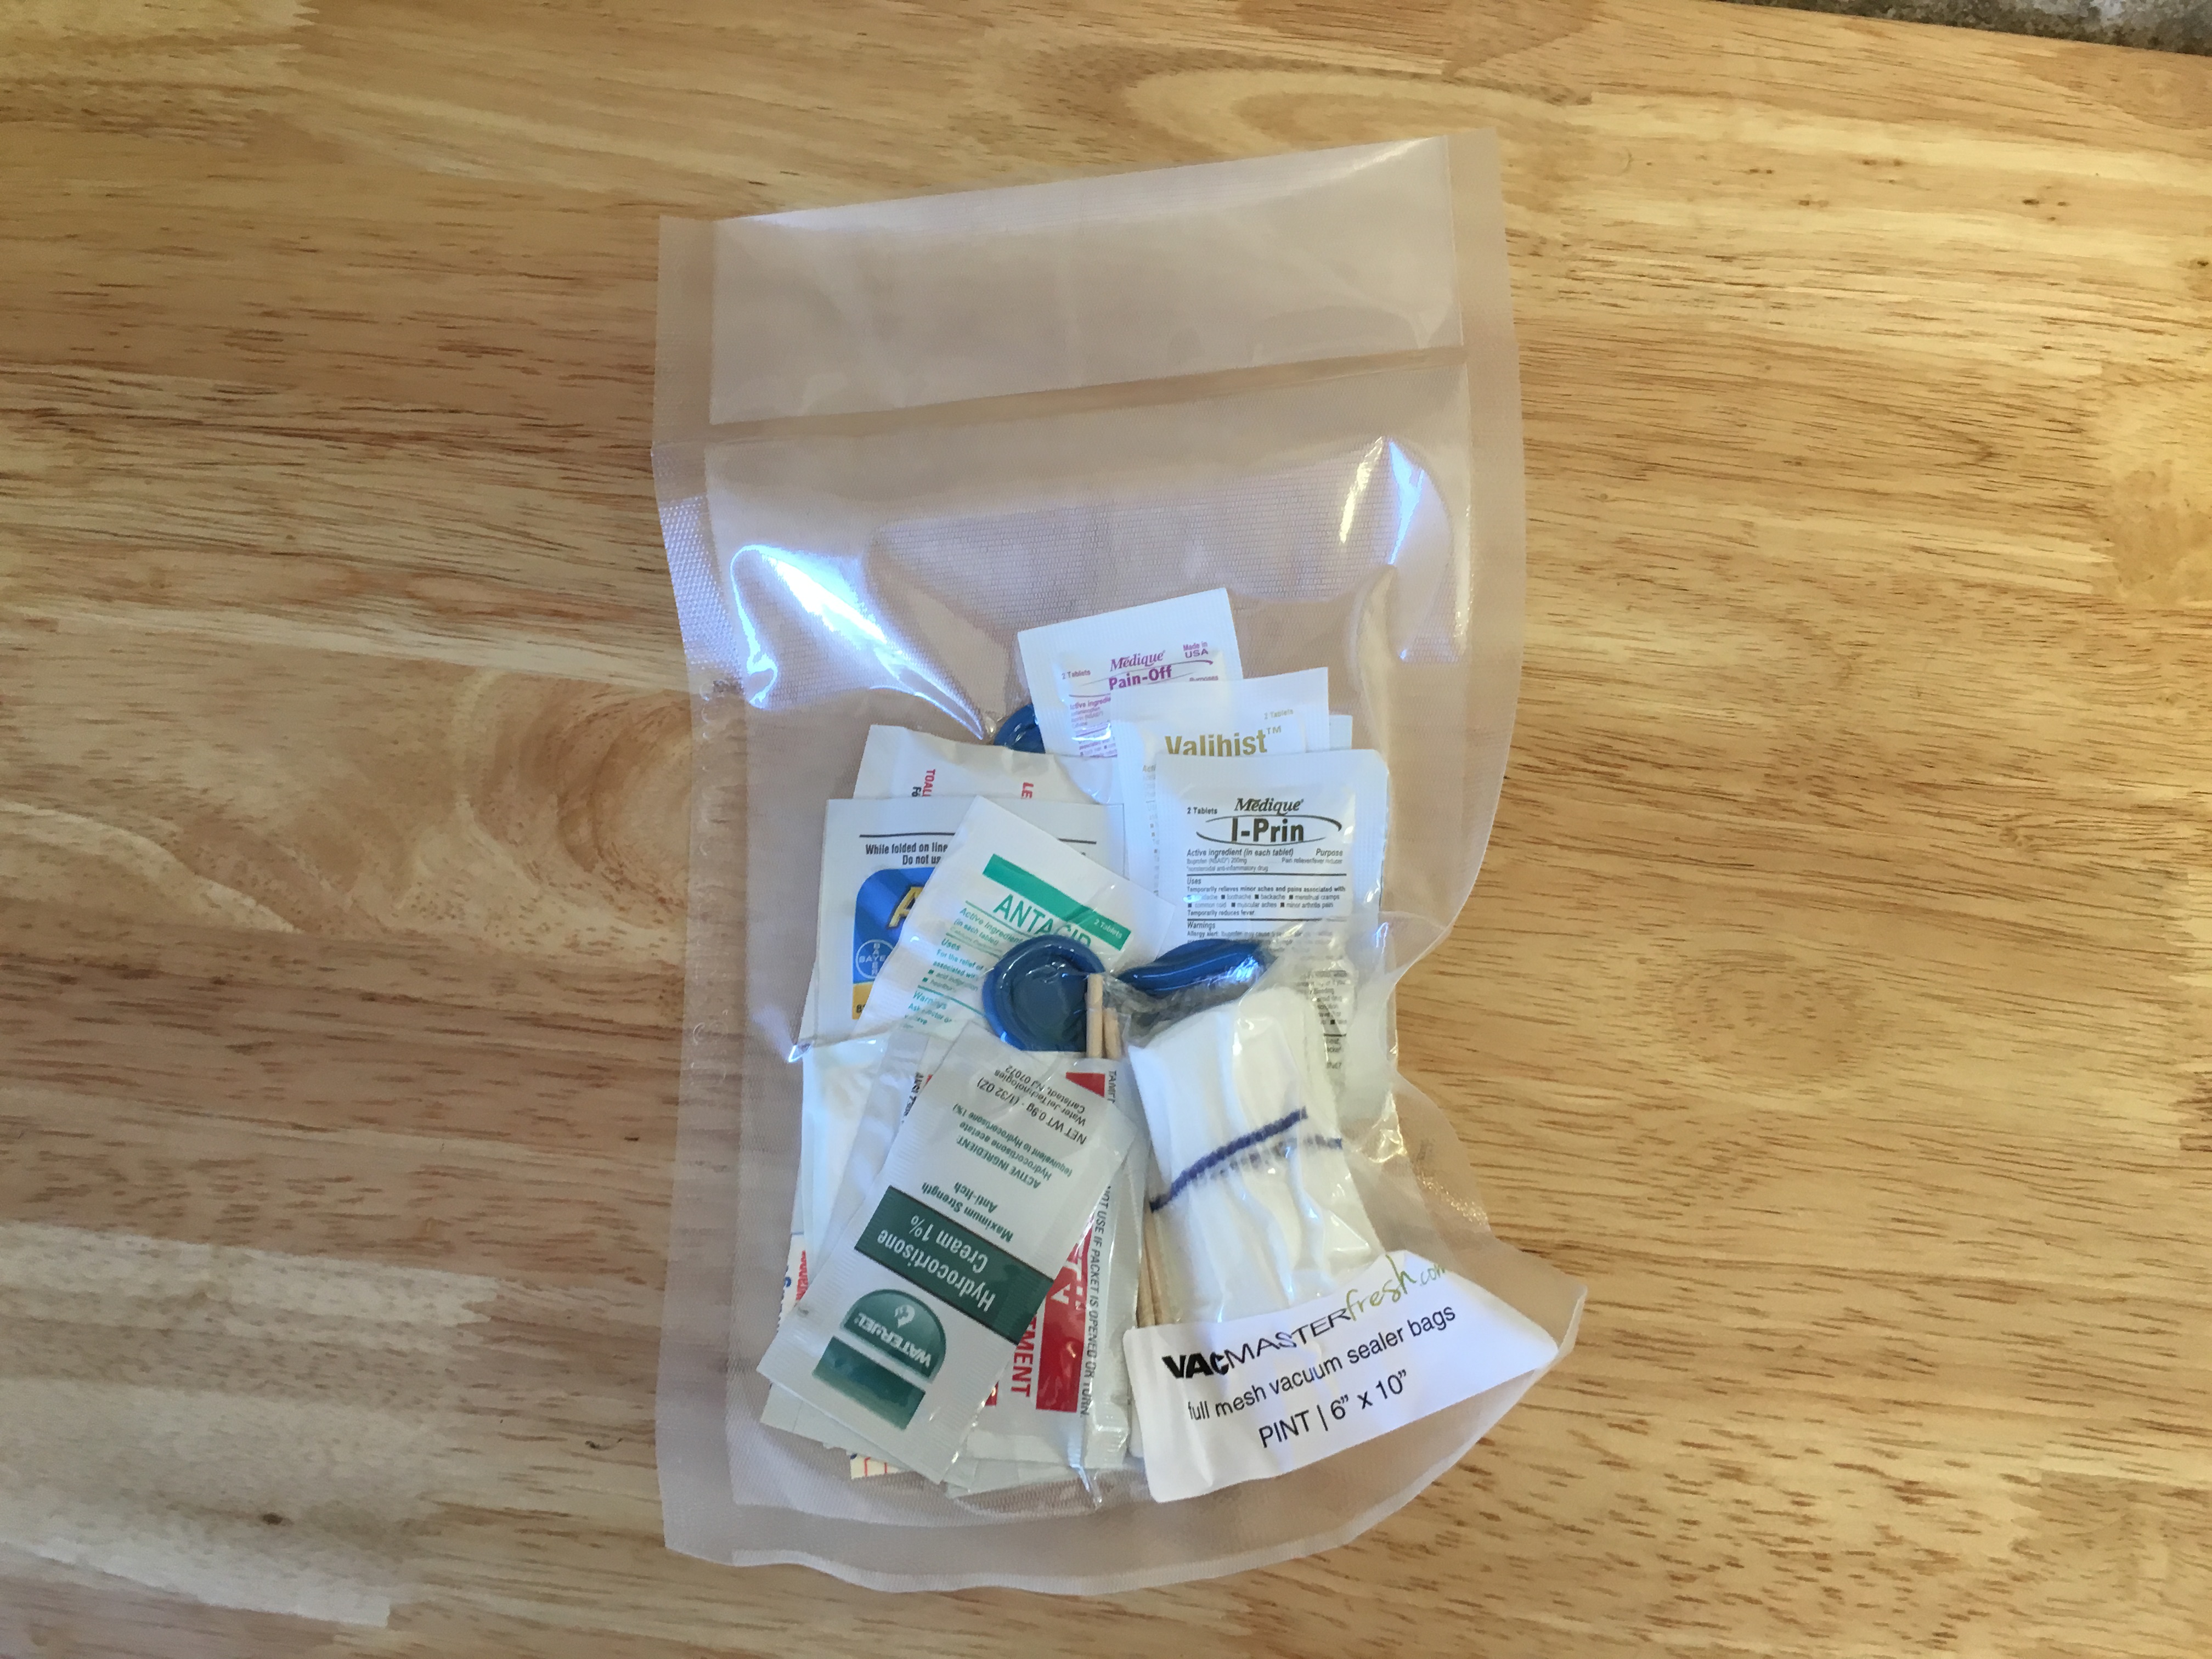 VacMaster first aid kit